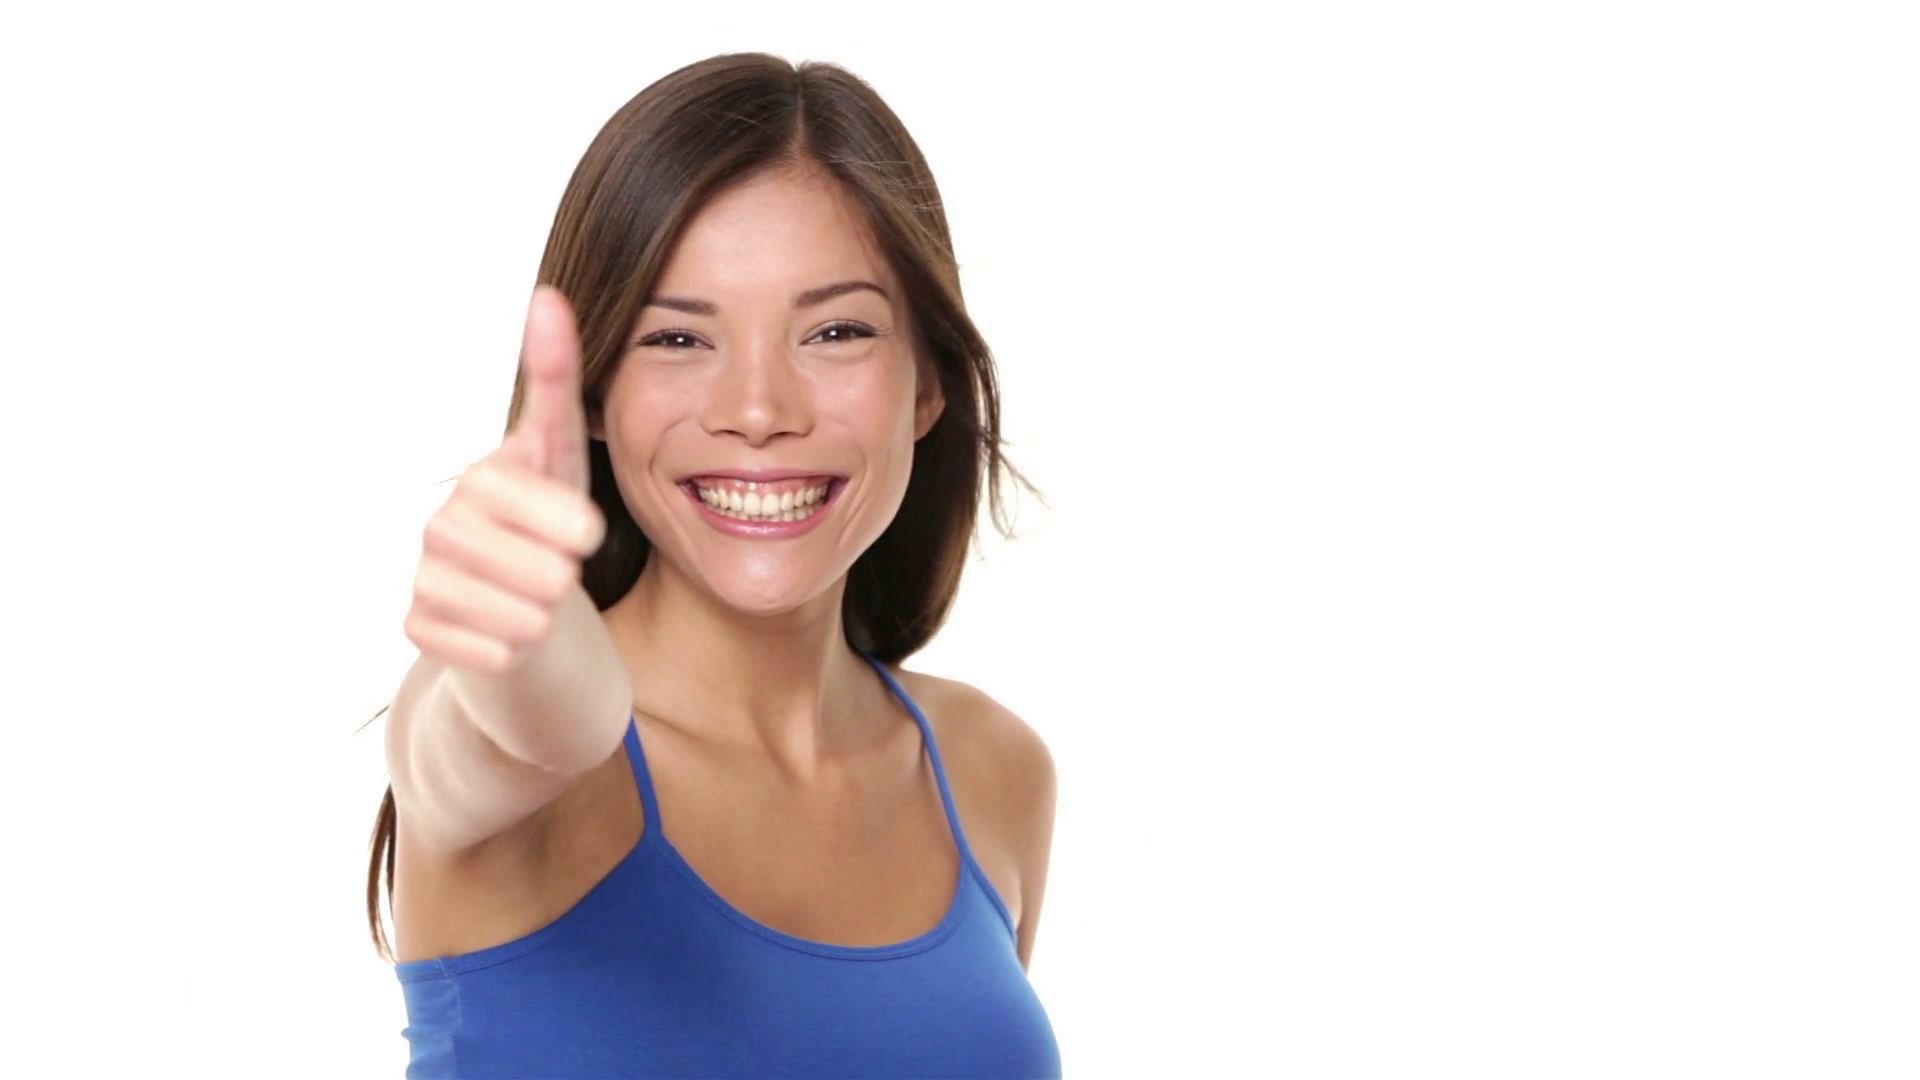 videoblocks-thumbs-up-happy-girl-woman-giving-thumbs-up-success-hand-sign-smiling-joyful-and-happy-pretty-young-multiracial-asian-caucasian-female-model-in-tank-top-isolated-on-white-background-in-studio_hzmu1oeyy_thumbnail-full06